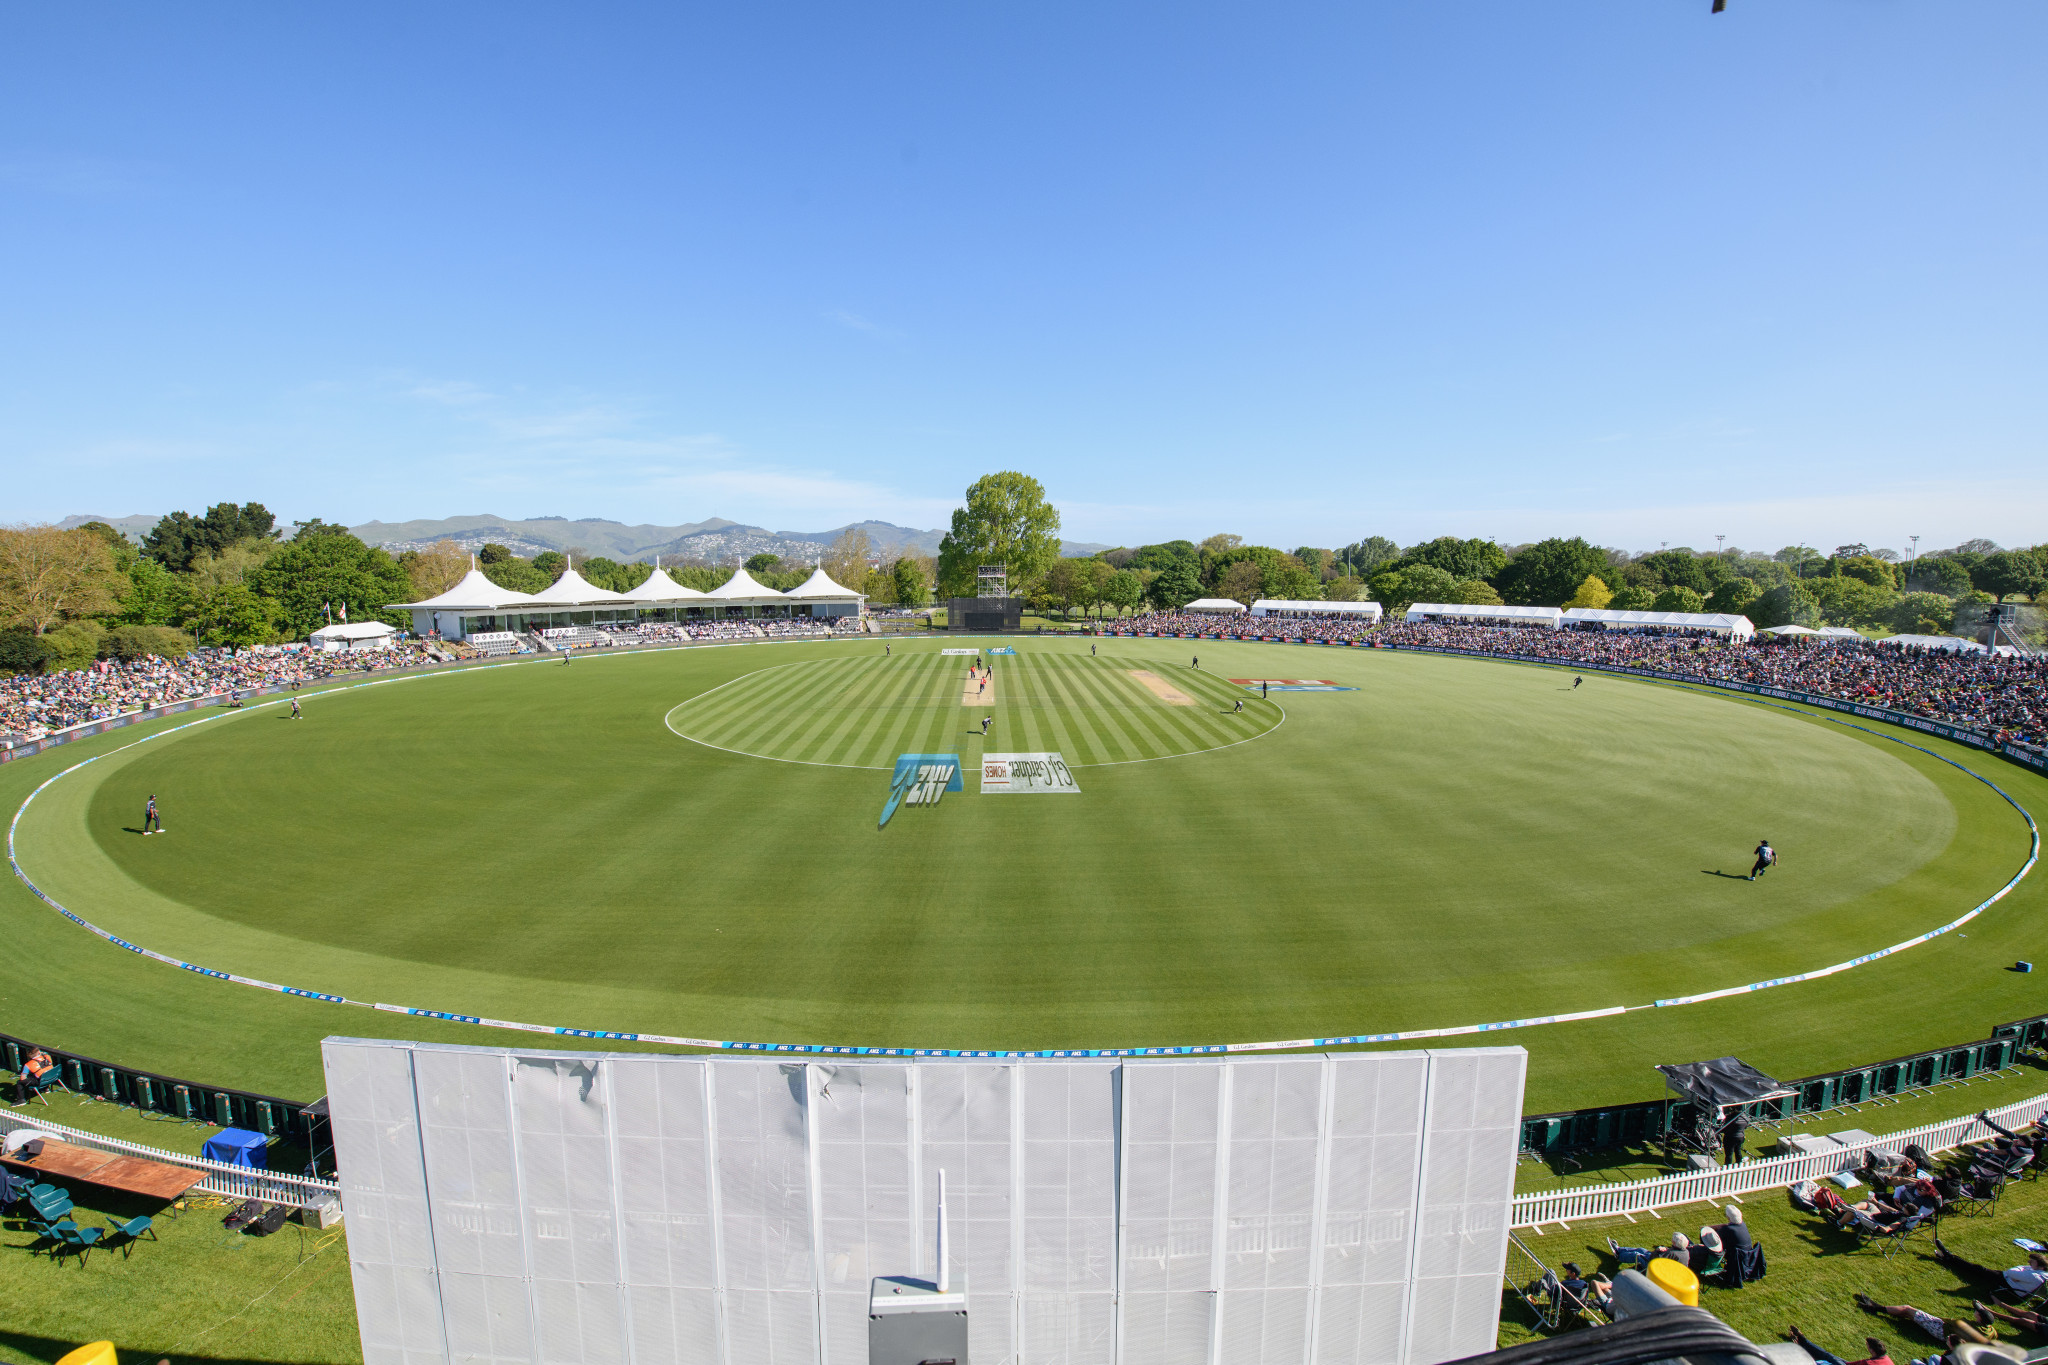 Christchurch's Hagley Oval to host 2021 Women's Cricket World Cup final, as six host cities named